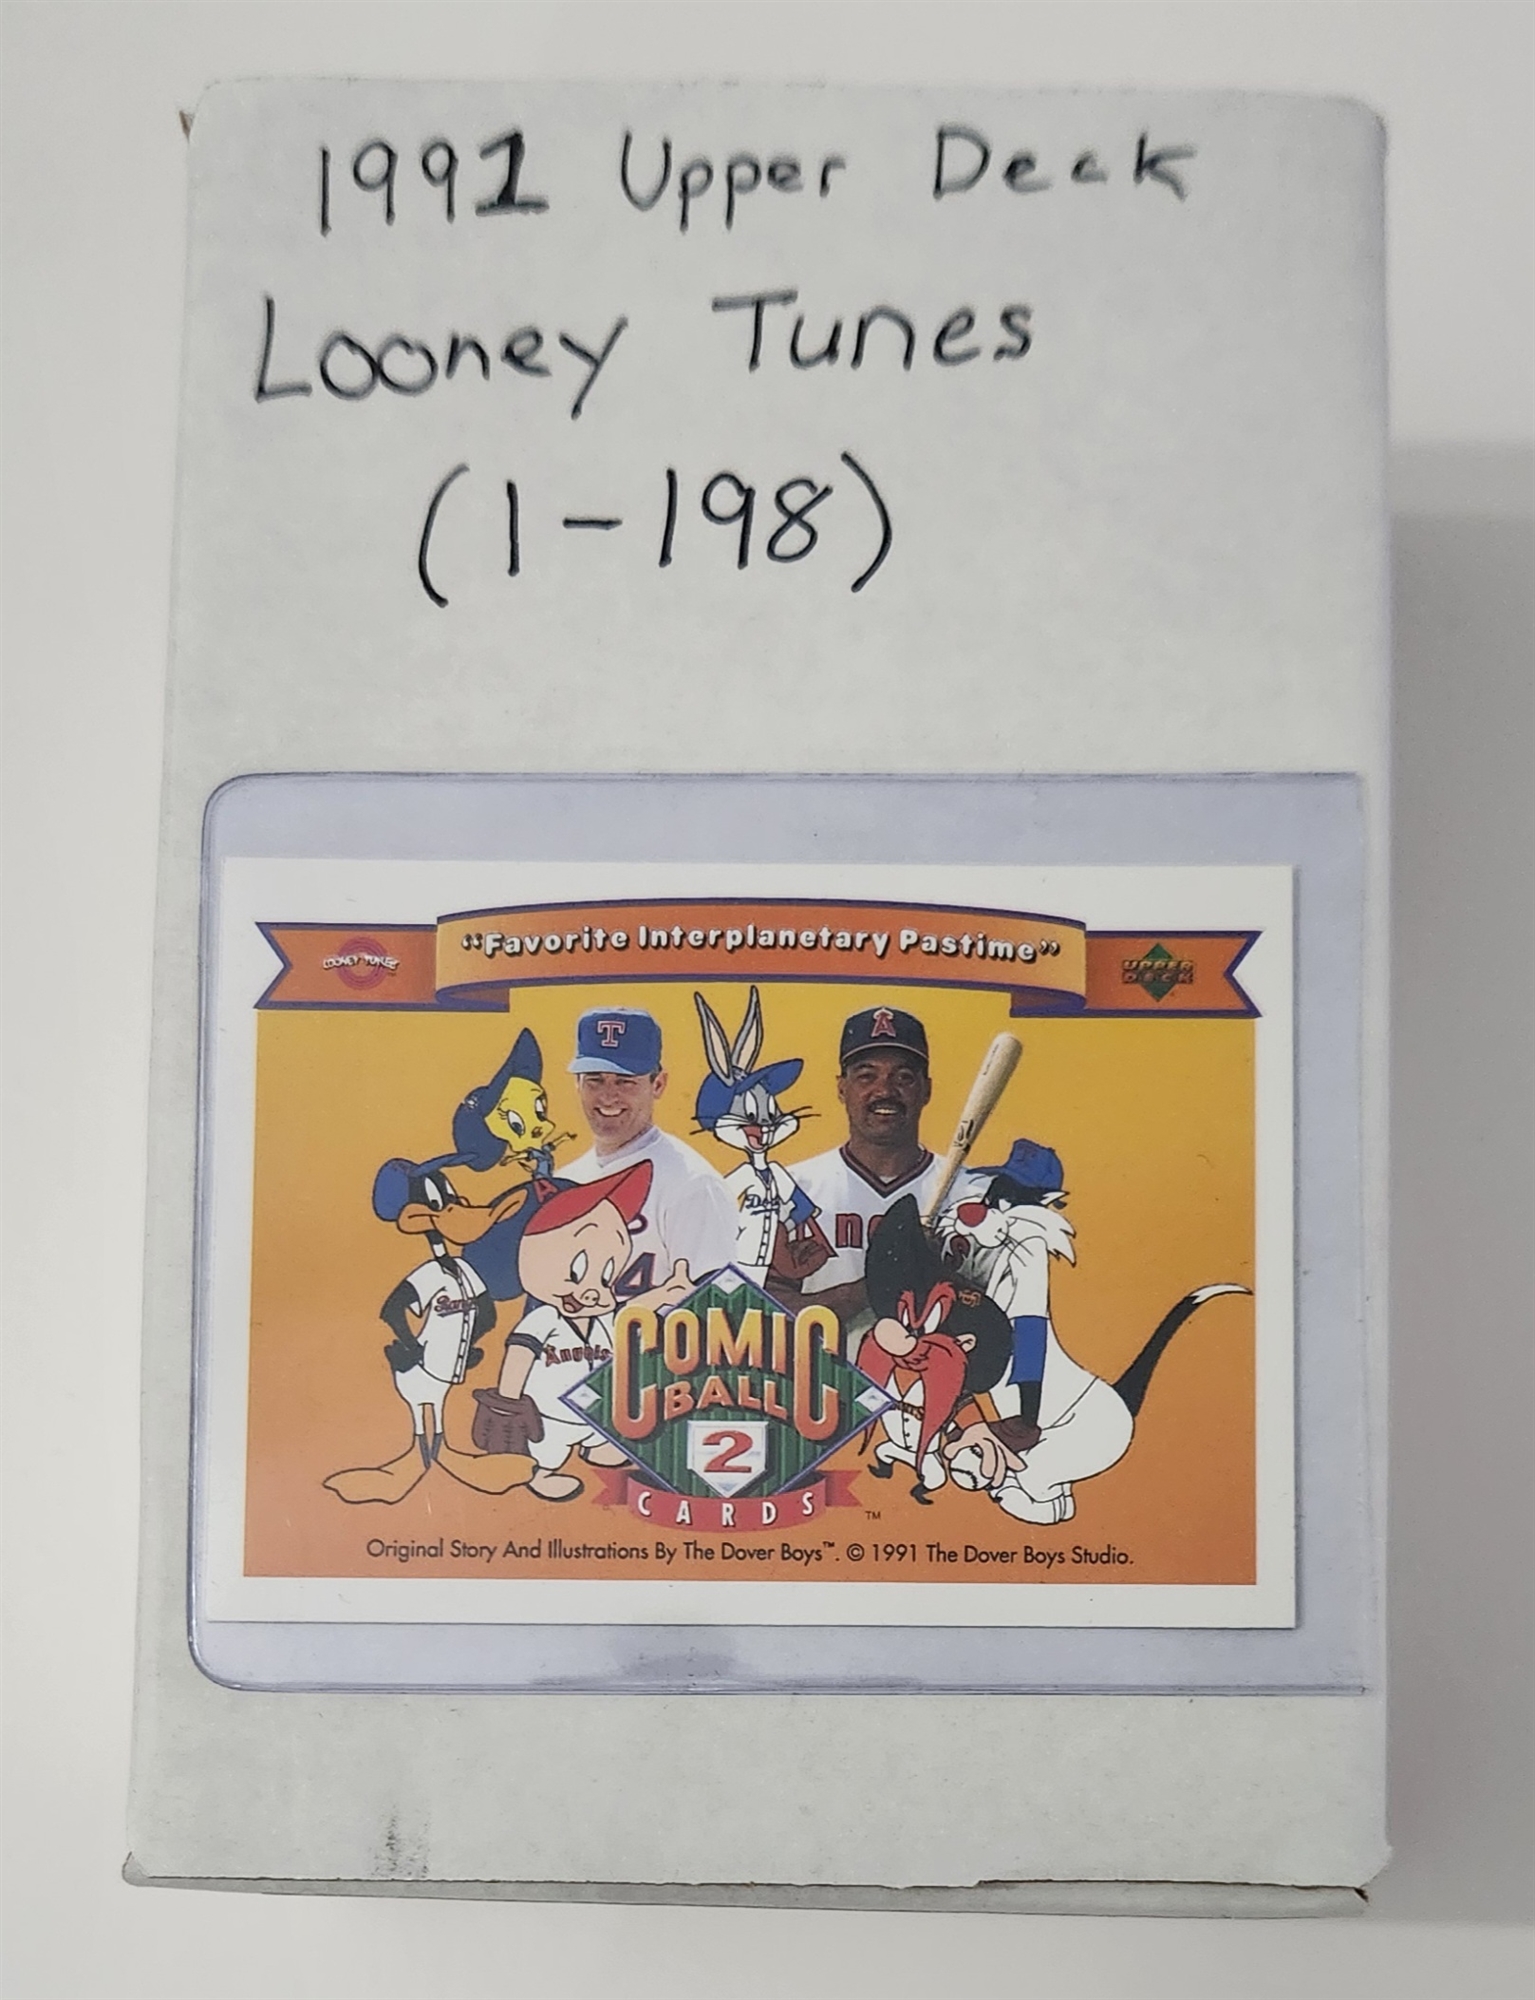 1991 Upper Deck Looney Tunes Comic Ball Trading Cards Complete Base Set